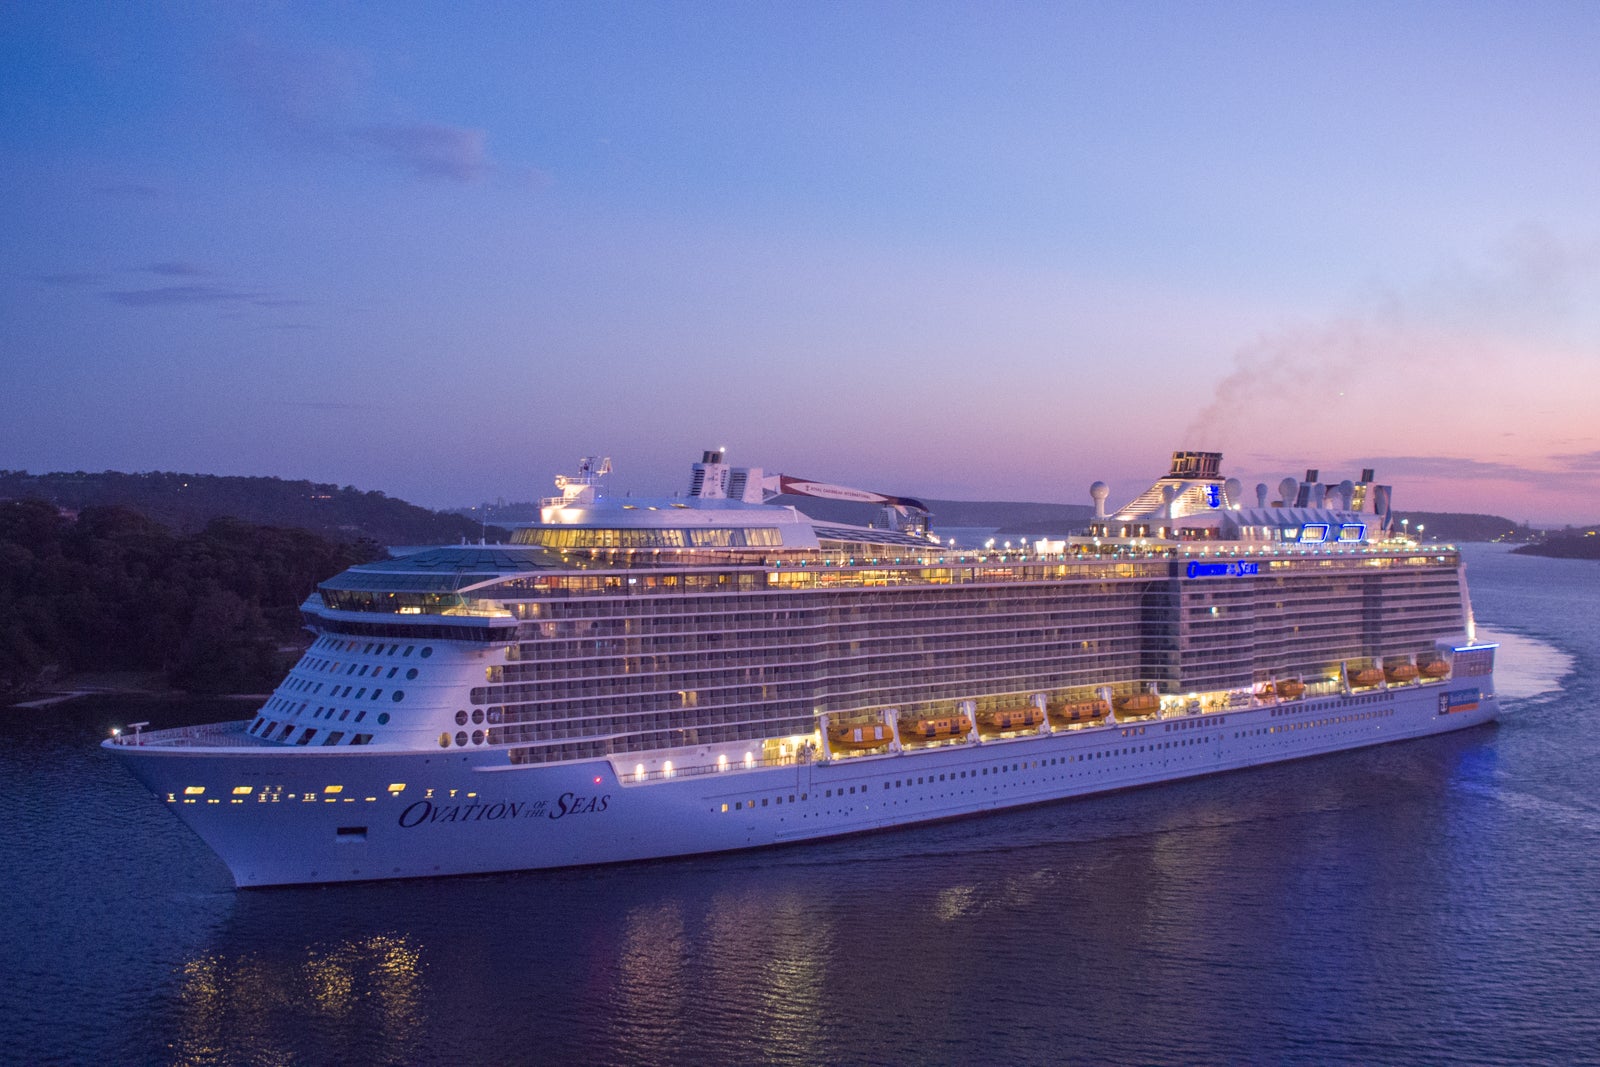 largest cruise ship guest capacity